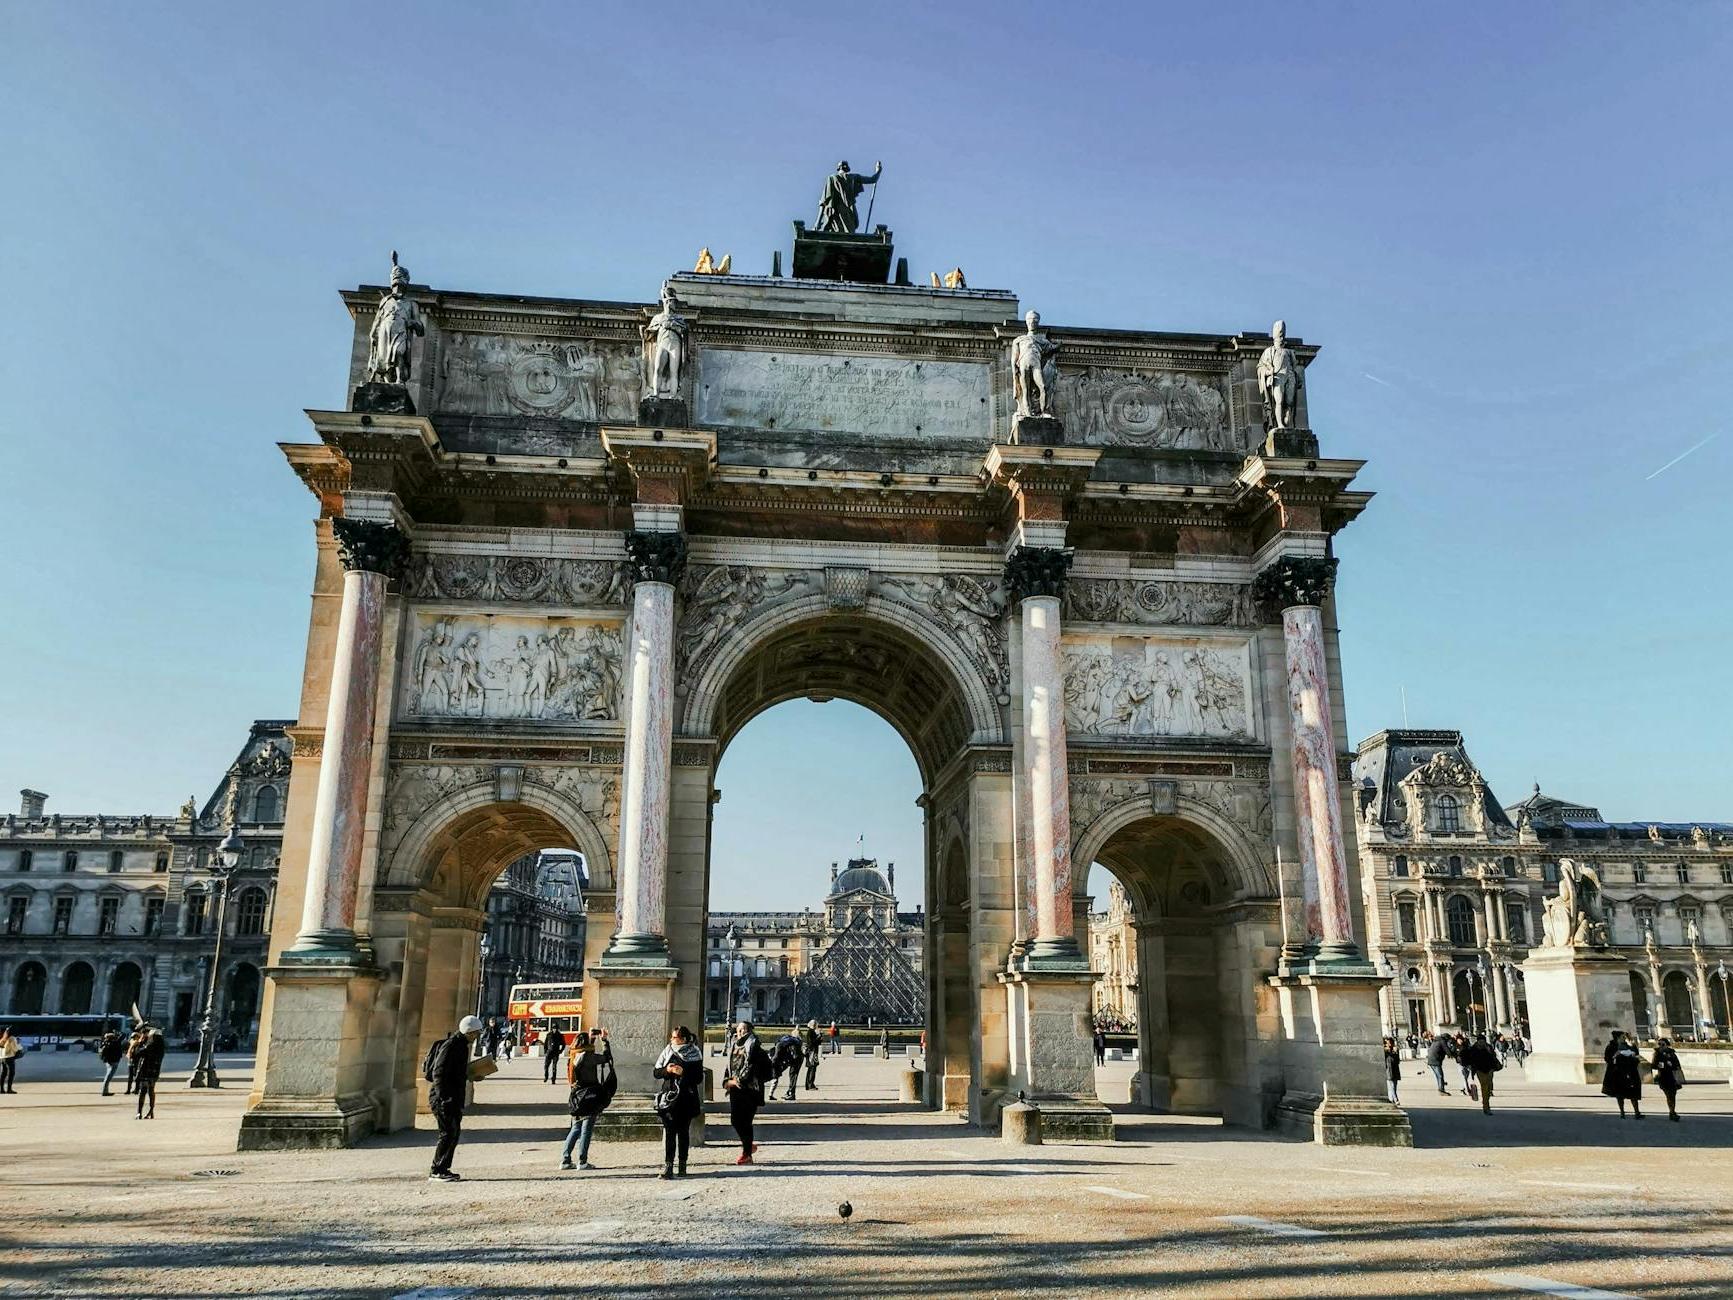 Old triumphal arch with sculptures on square with unrecognizable tourists